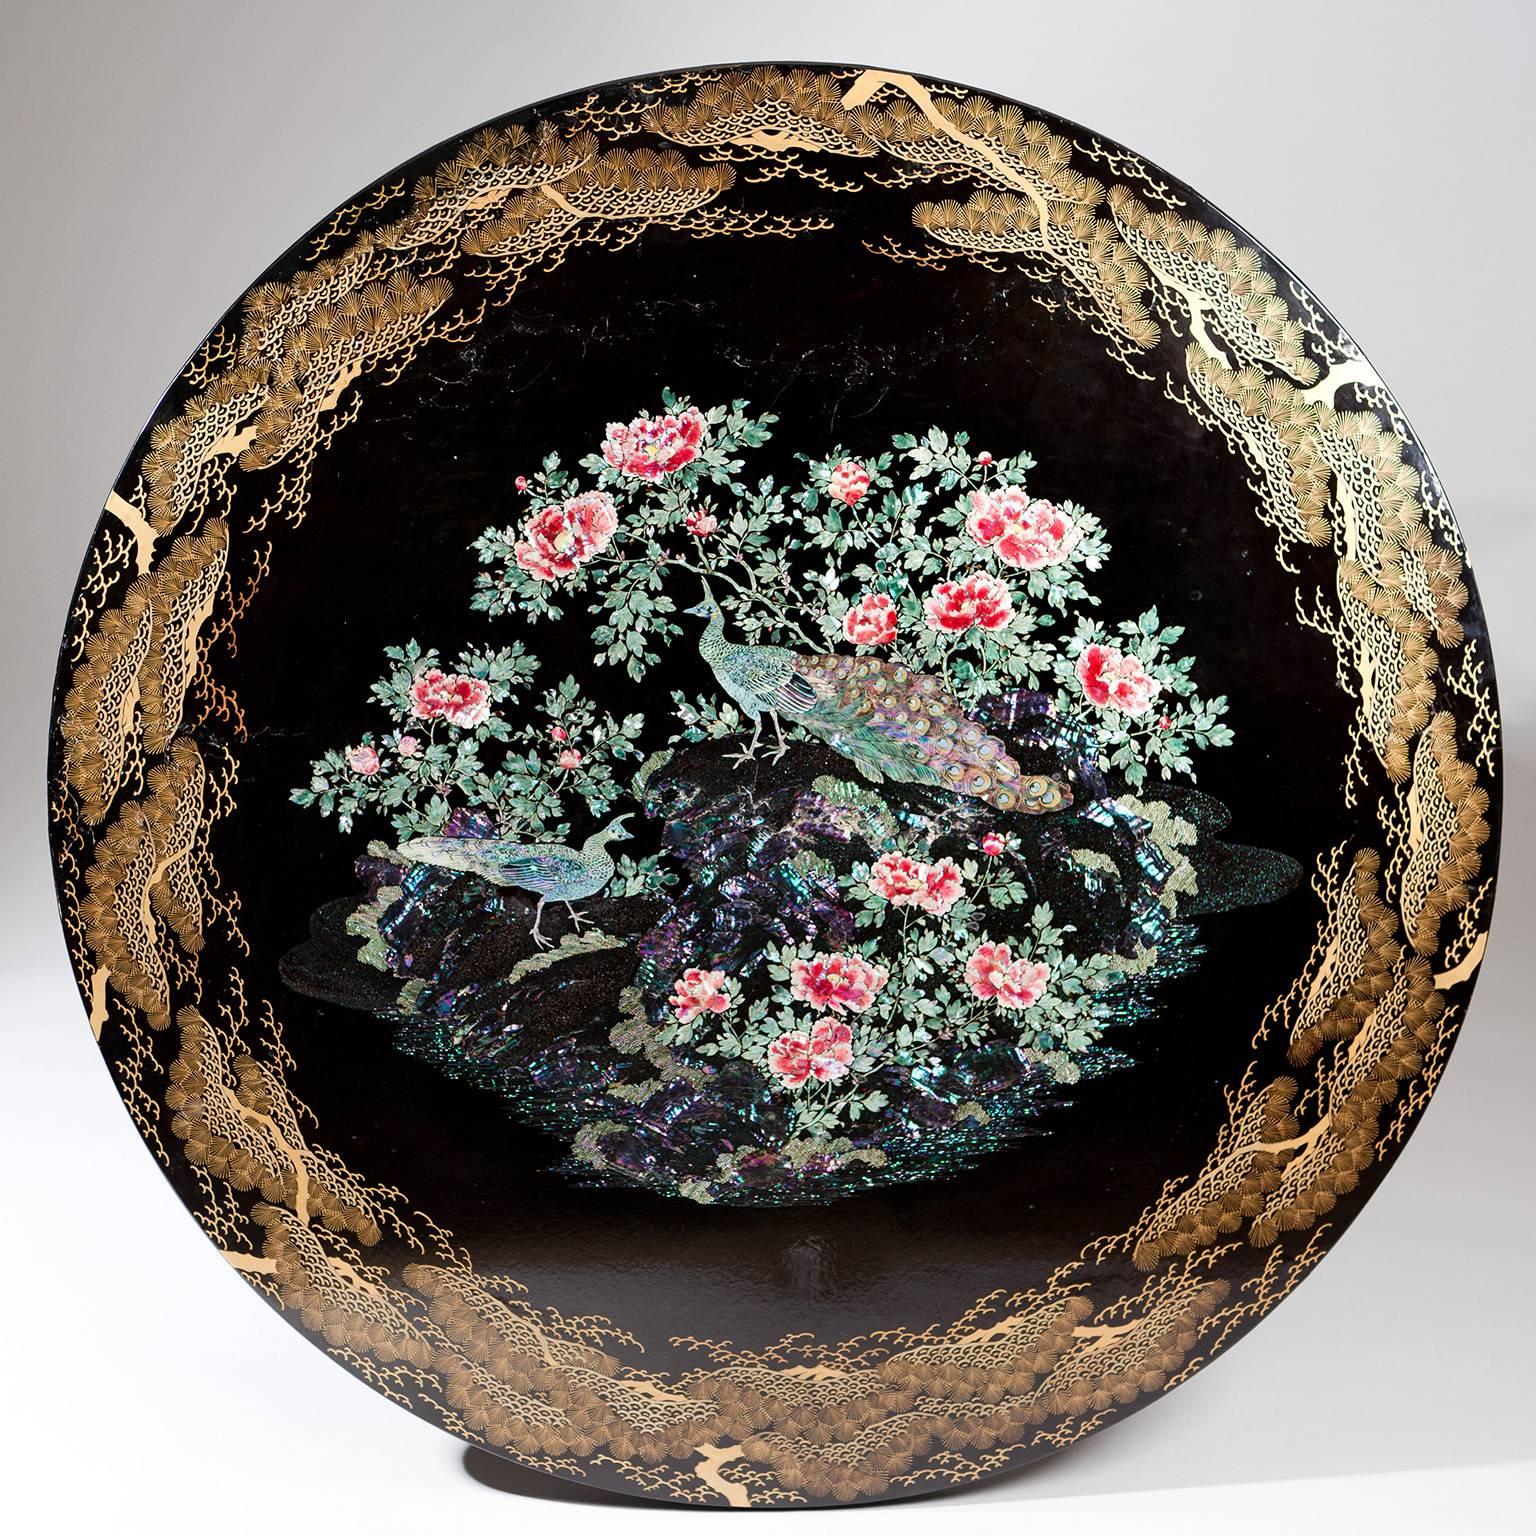 An exceptional mid-19th century Japanese lacquer center table, the top inlaid with mother-of-pearl and abalone shell marquetry of peacocks among peonies. 

The revolving drum top with single drawer in the frieze, raised on a column base supported